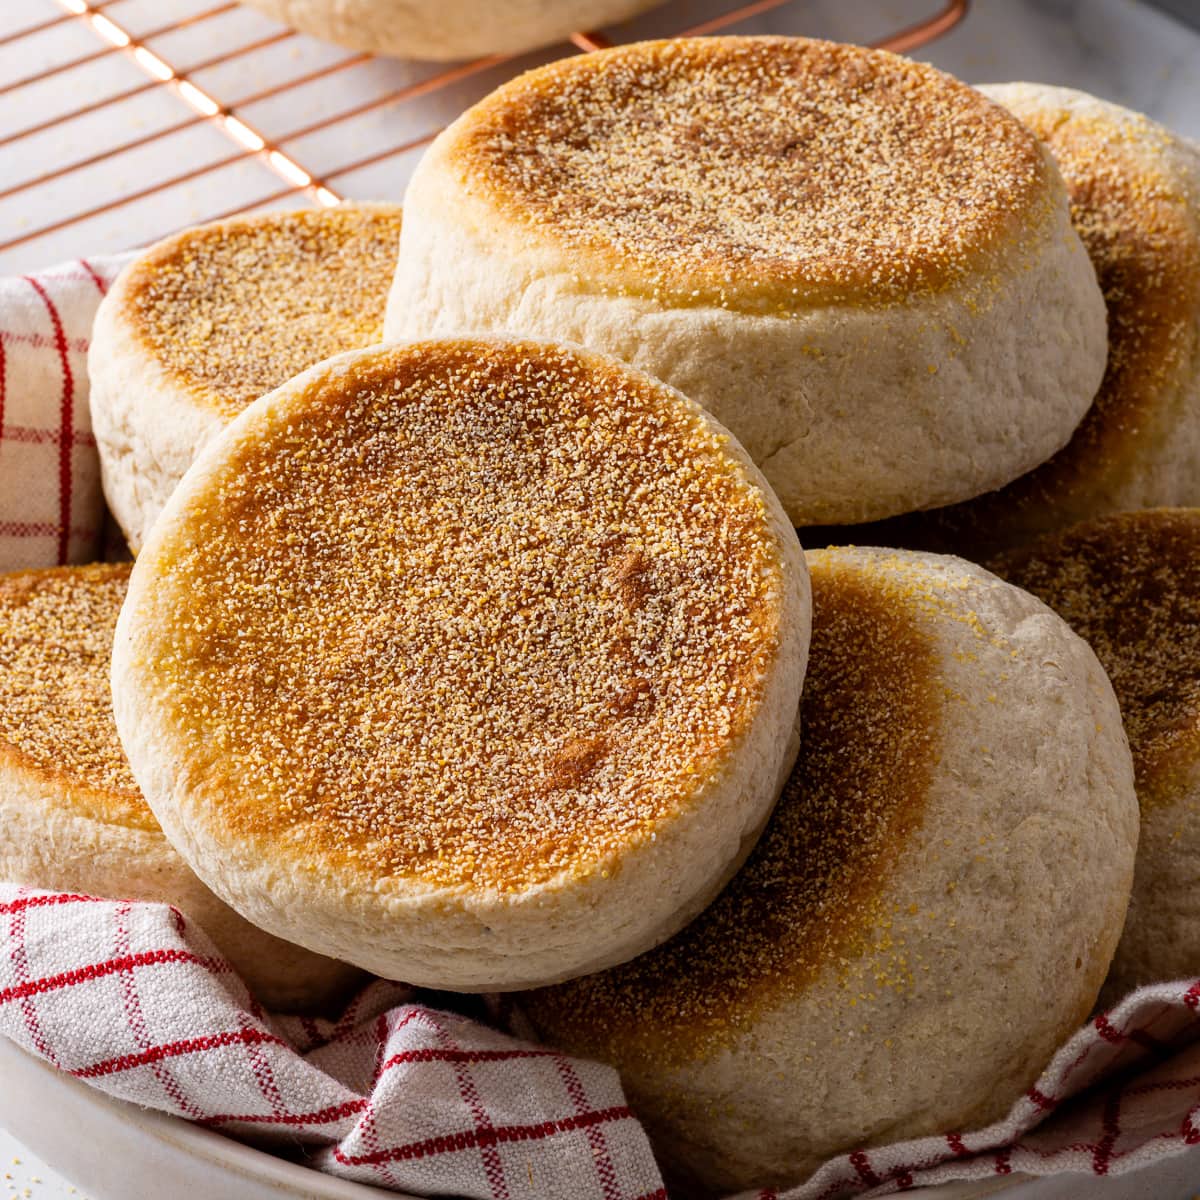 Gluten free English muffins piled on top of a checkered napkin.